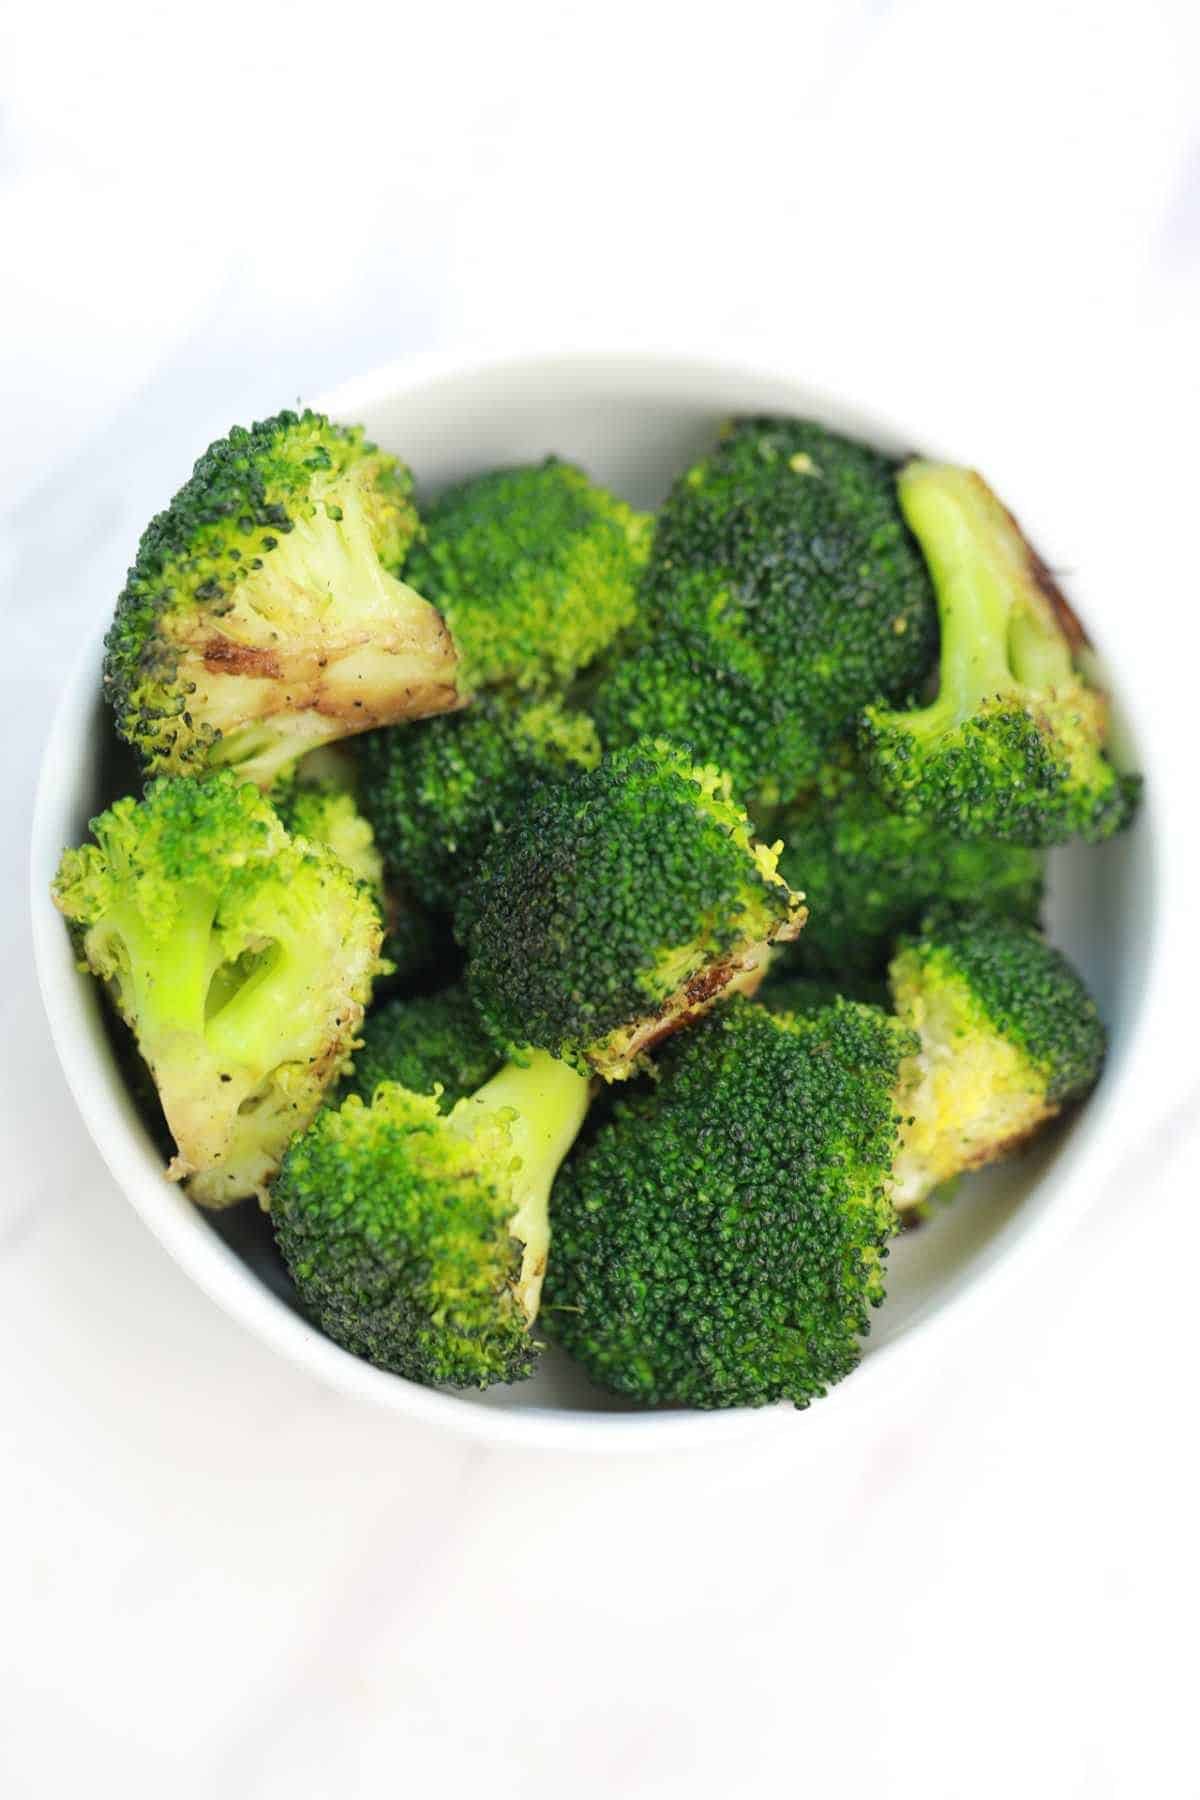 pan fried broccoli served in a white plate.